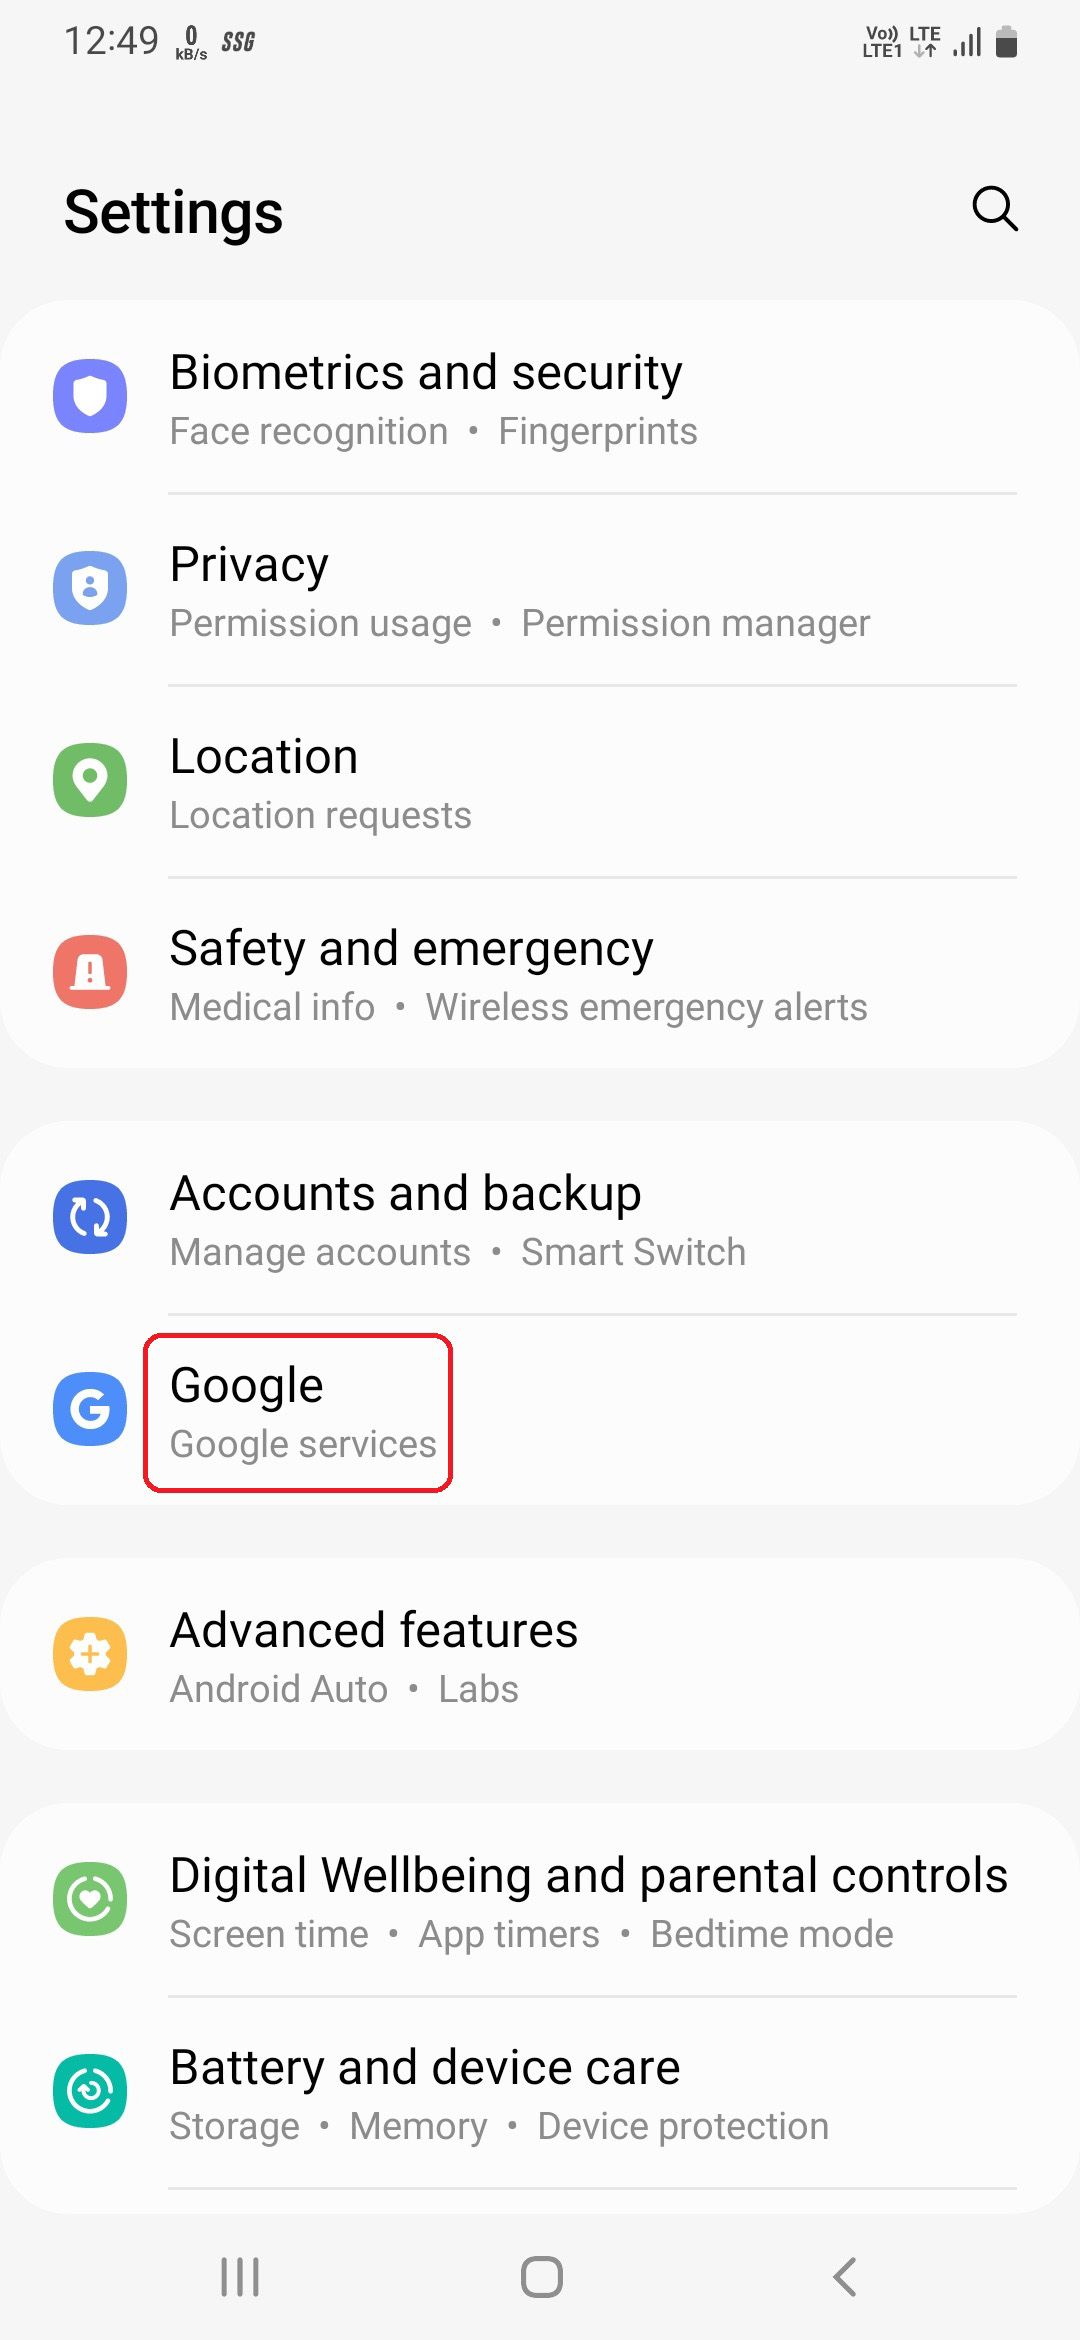 Google option in the settings